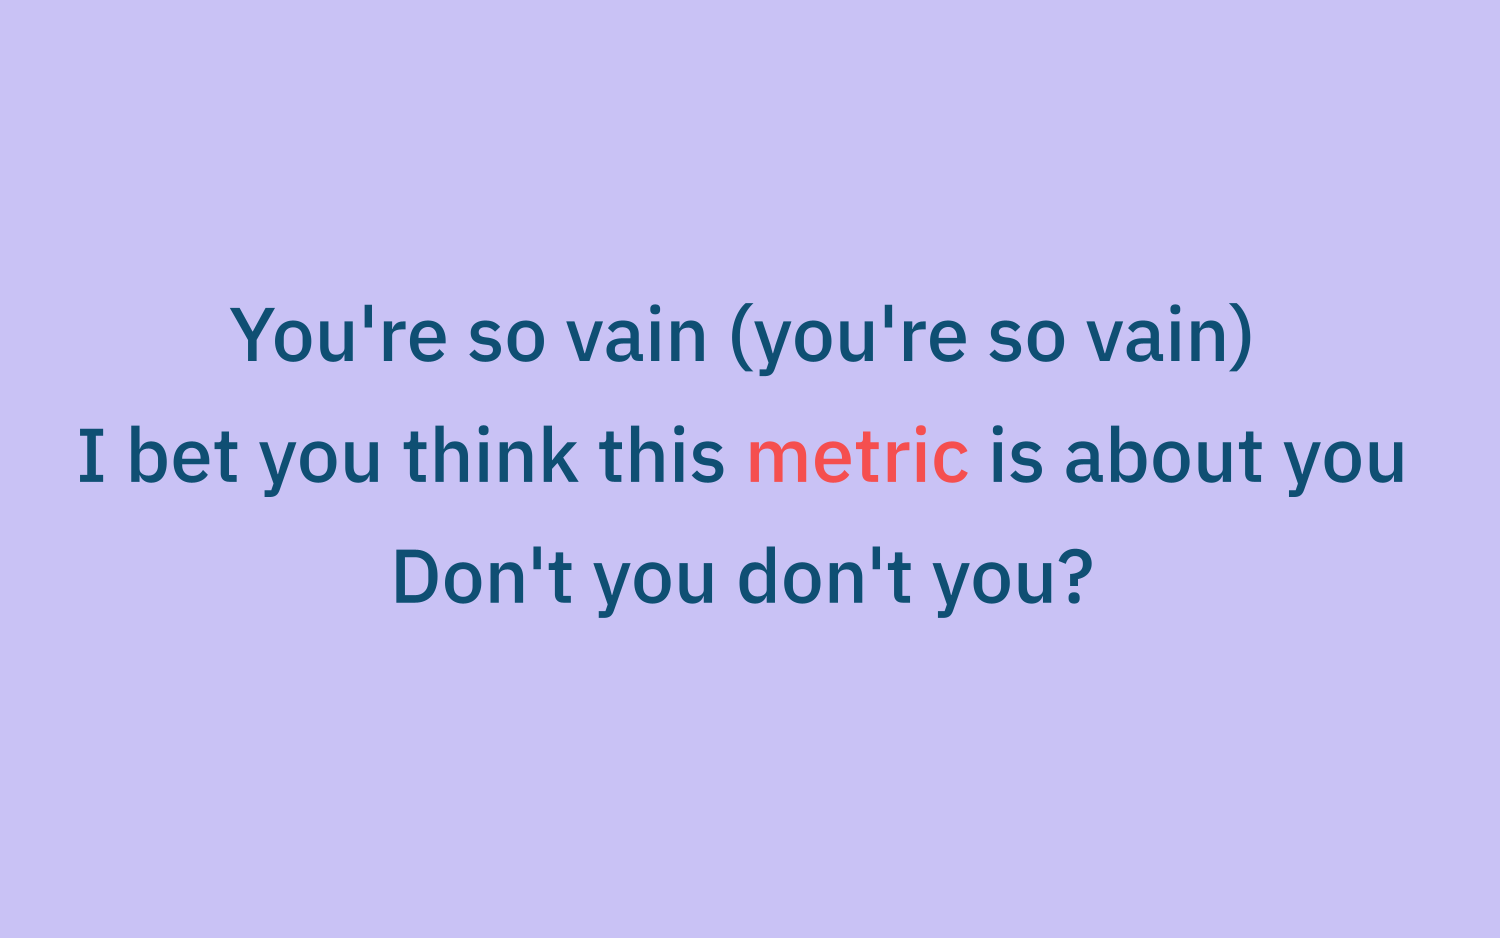 Humorous quote that adapts a Carly Simon song to describe vanity and metrics usage